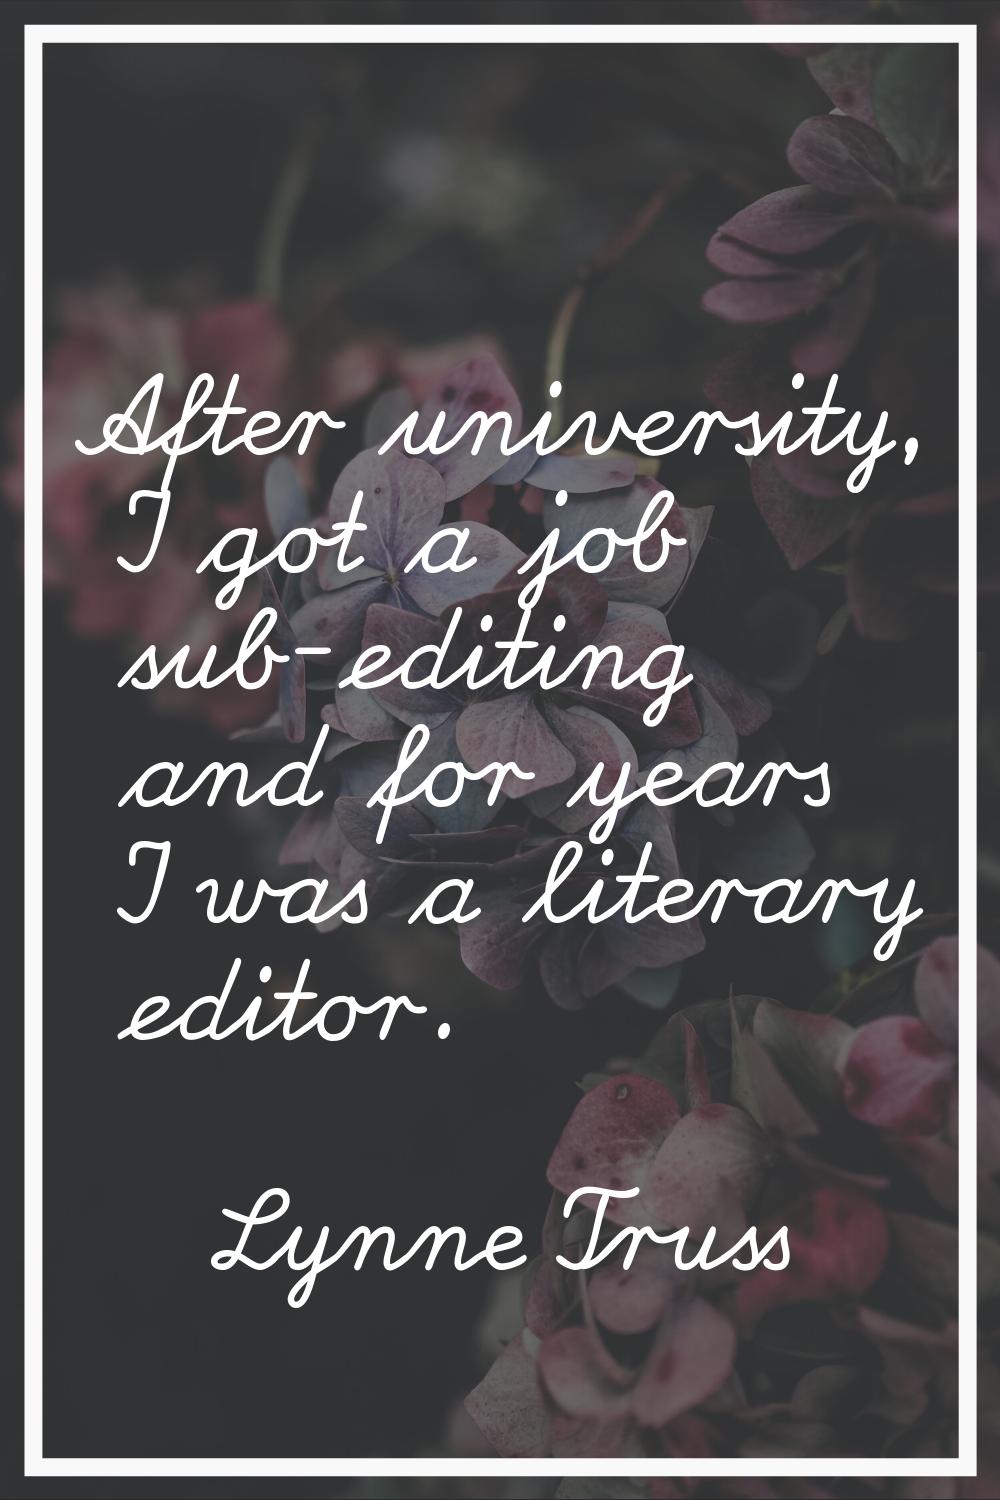 After university, I got a job sub-editing and for years I was a literary editor.